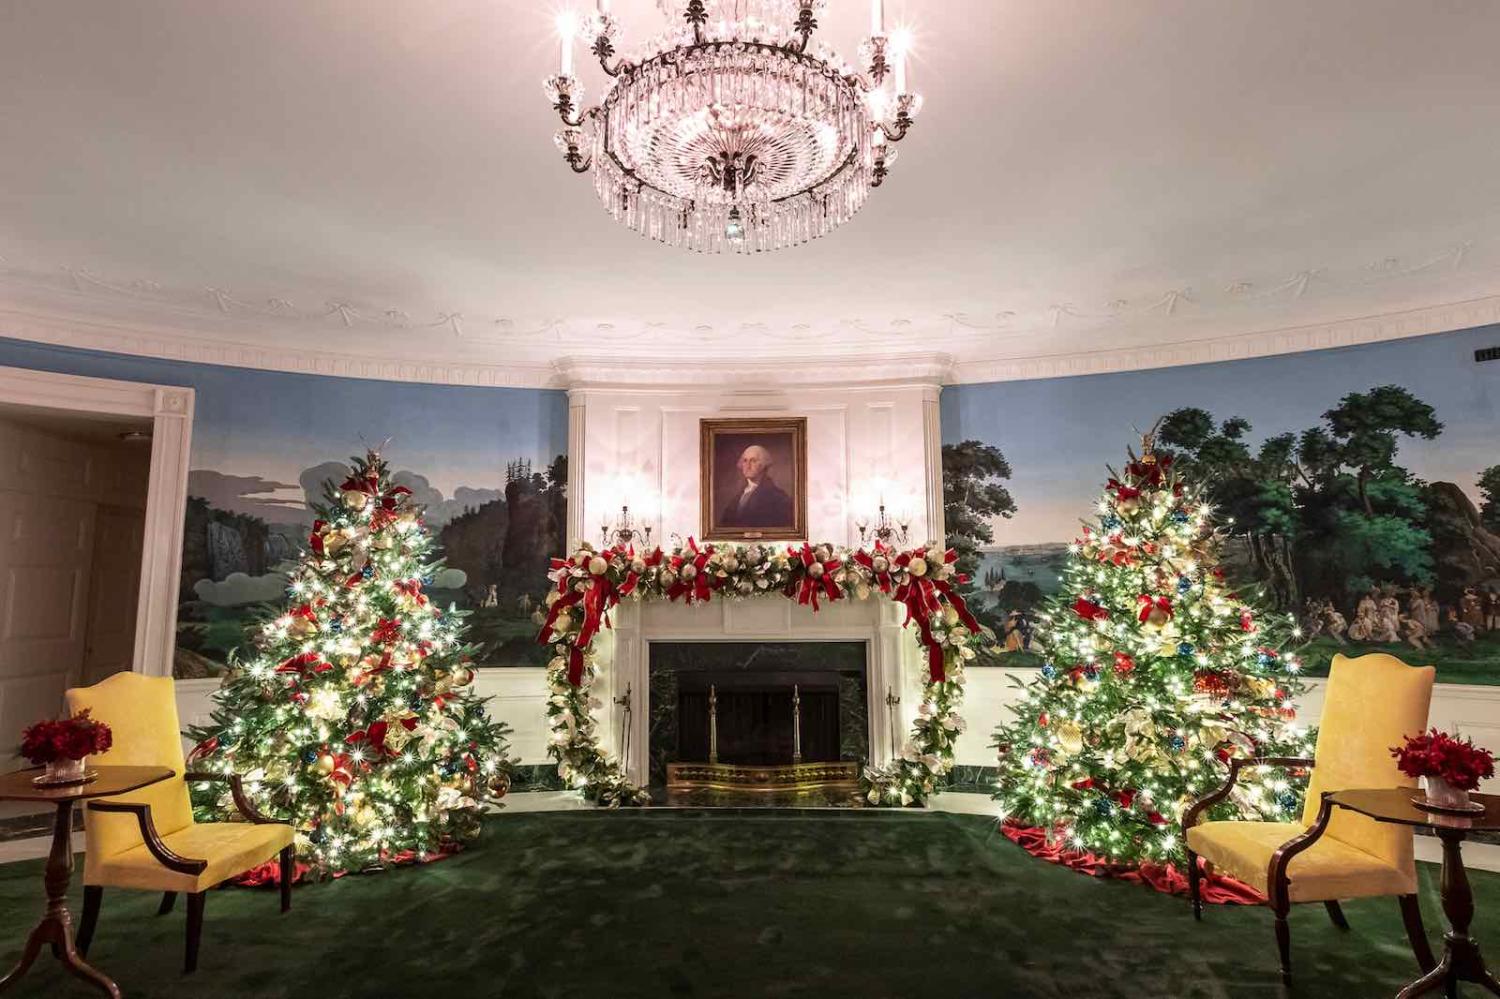 A portrait of George Washington hangs in the Diplomatic Reception Room of the White House, decorated for the 2019 Christmas season (Photo: The White House/Flickr)